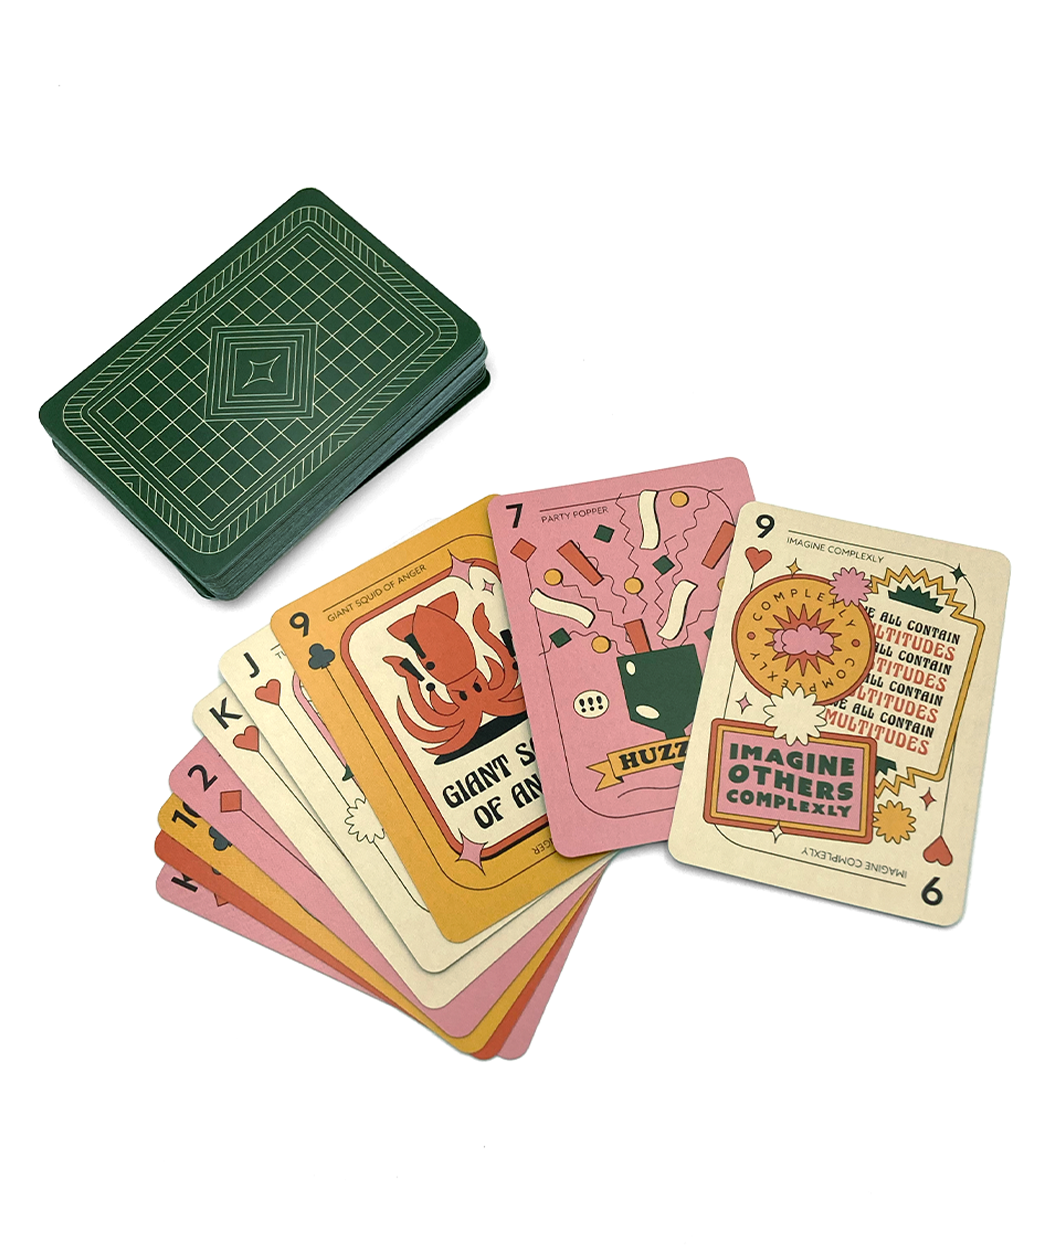 Yiddish Card Game - Friends and Neighbors C124Y